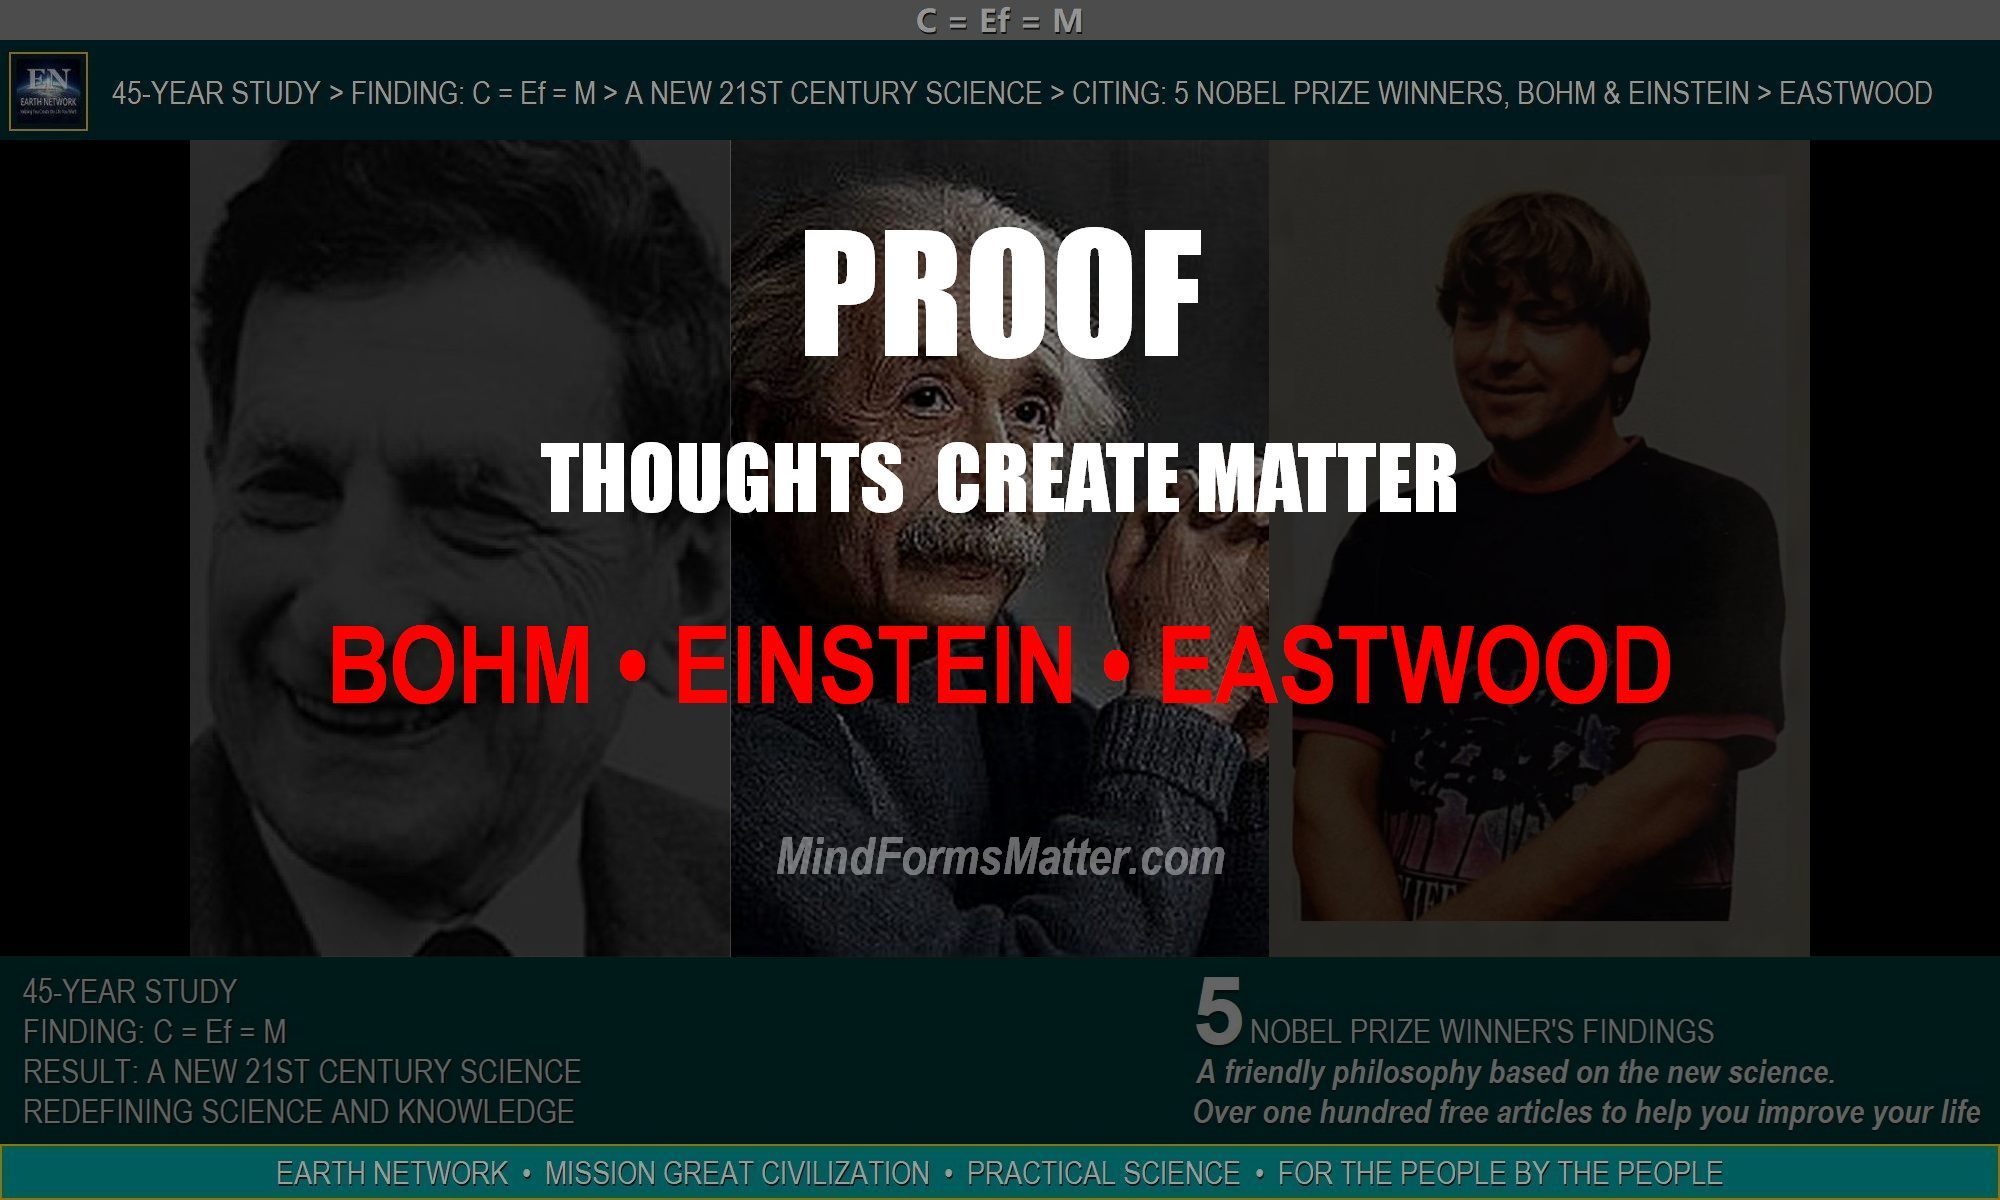 Bohm, Einstein and Eastwood together show that your thoughts can create matter. Proof and scientific evidence and examples thoughts create reality are given.